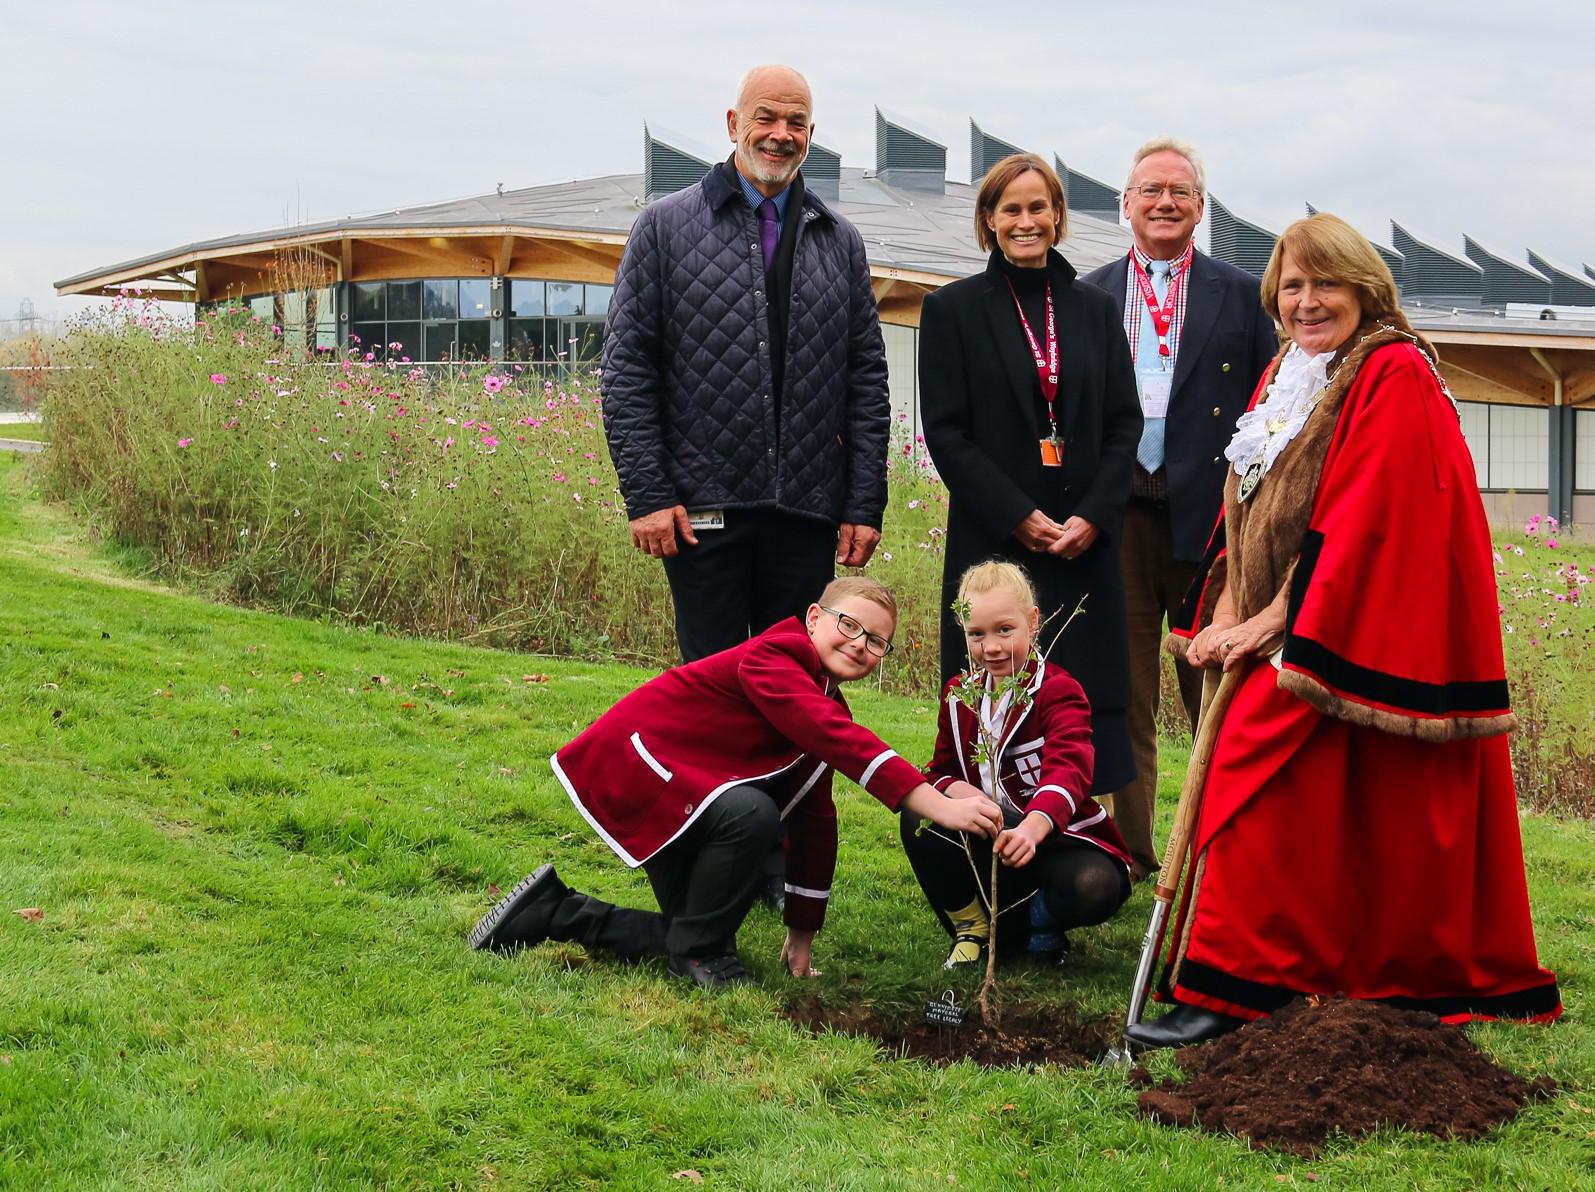 The Mayor of Runnymede, Cllr Elaine Gill plants a tree at St. George's College Weybridge